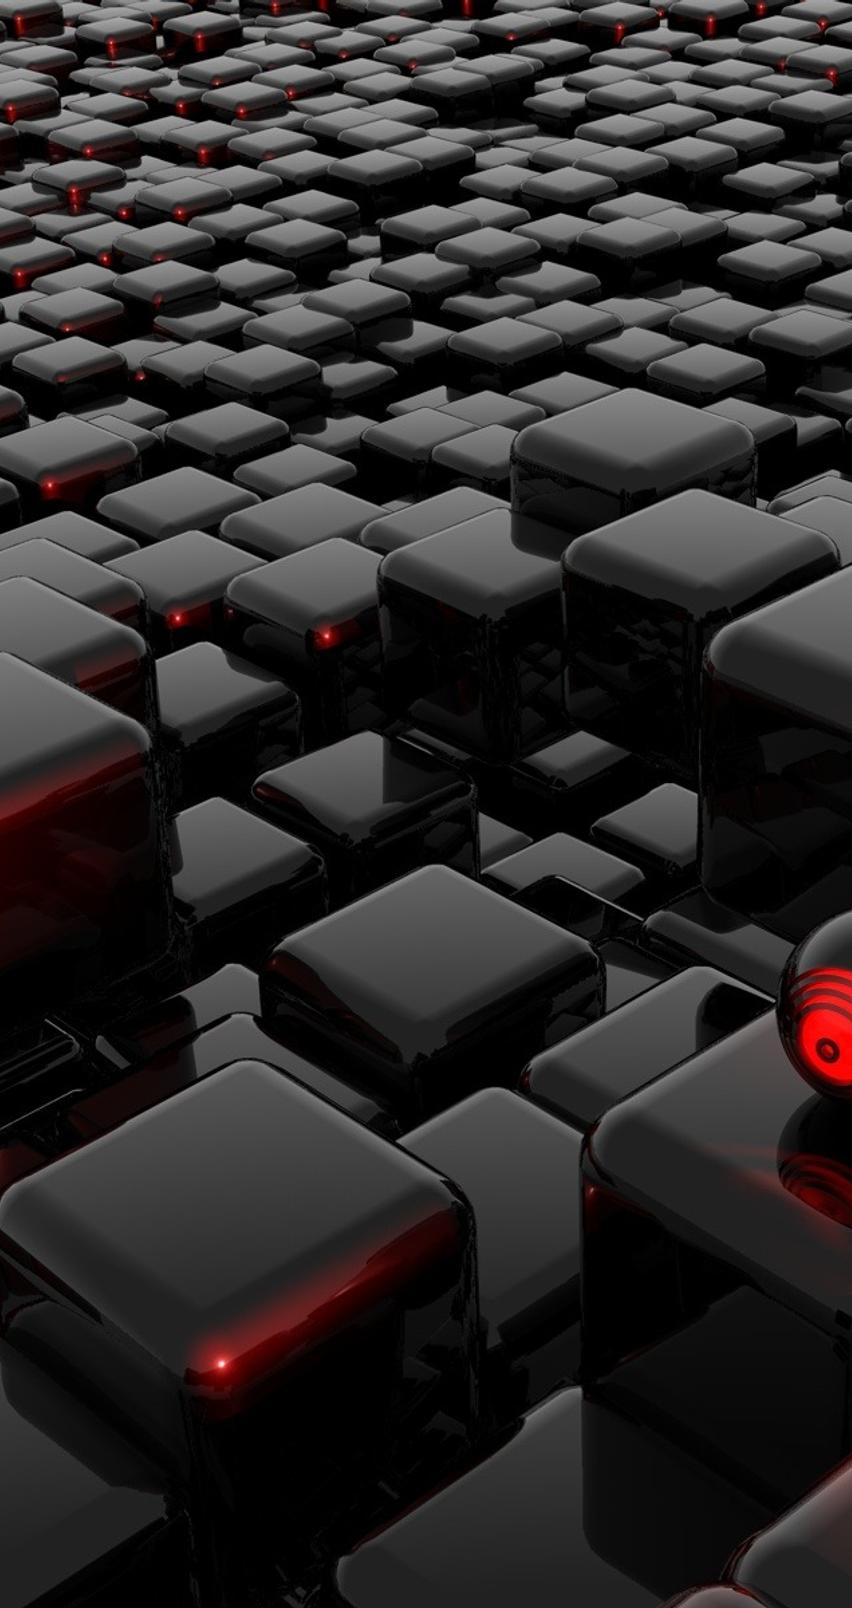 3d Wallpaper Black And Red Image Num 58